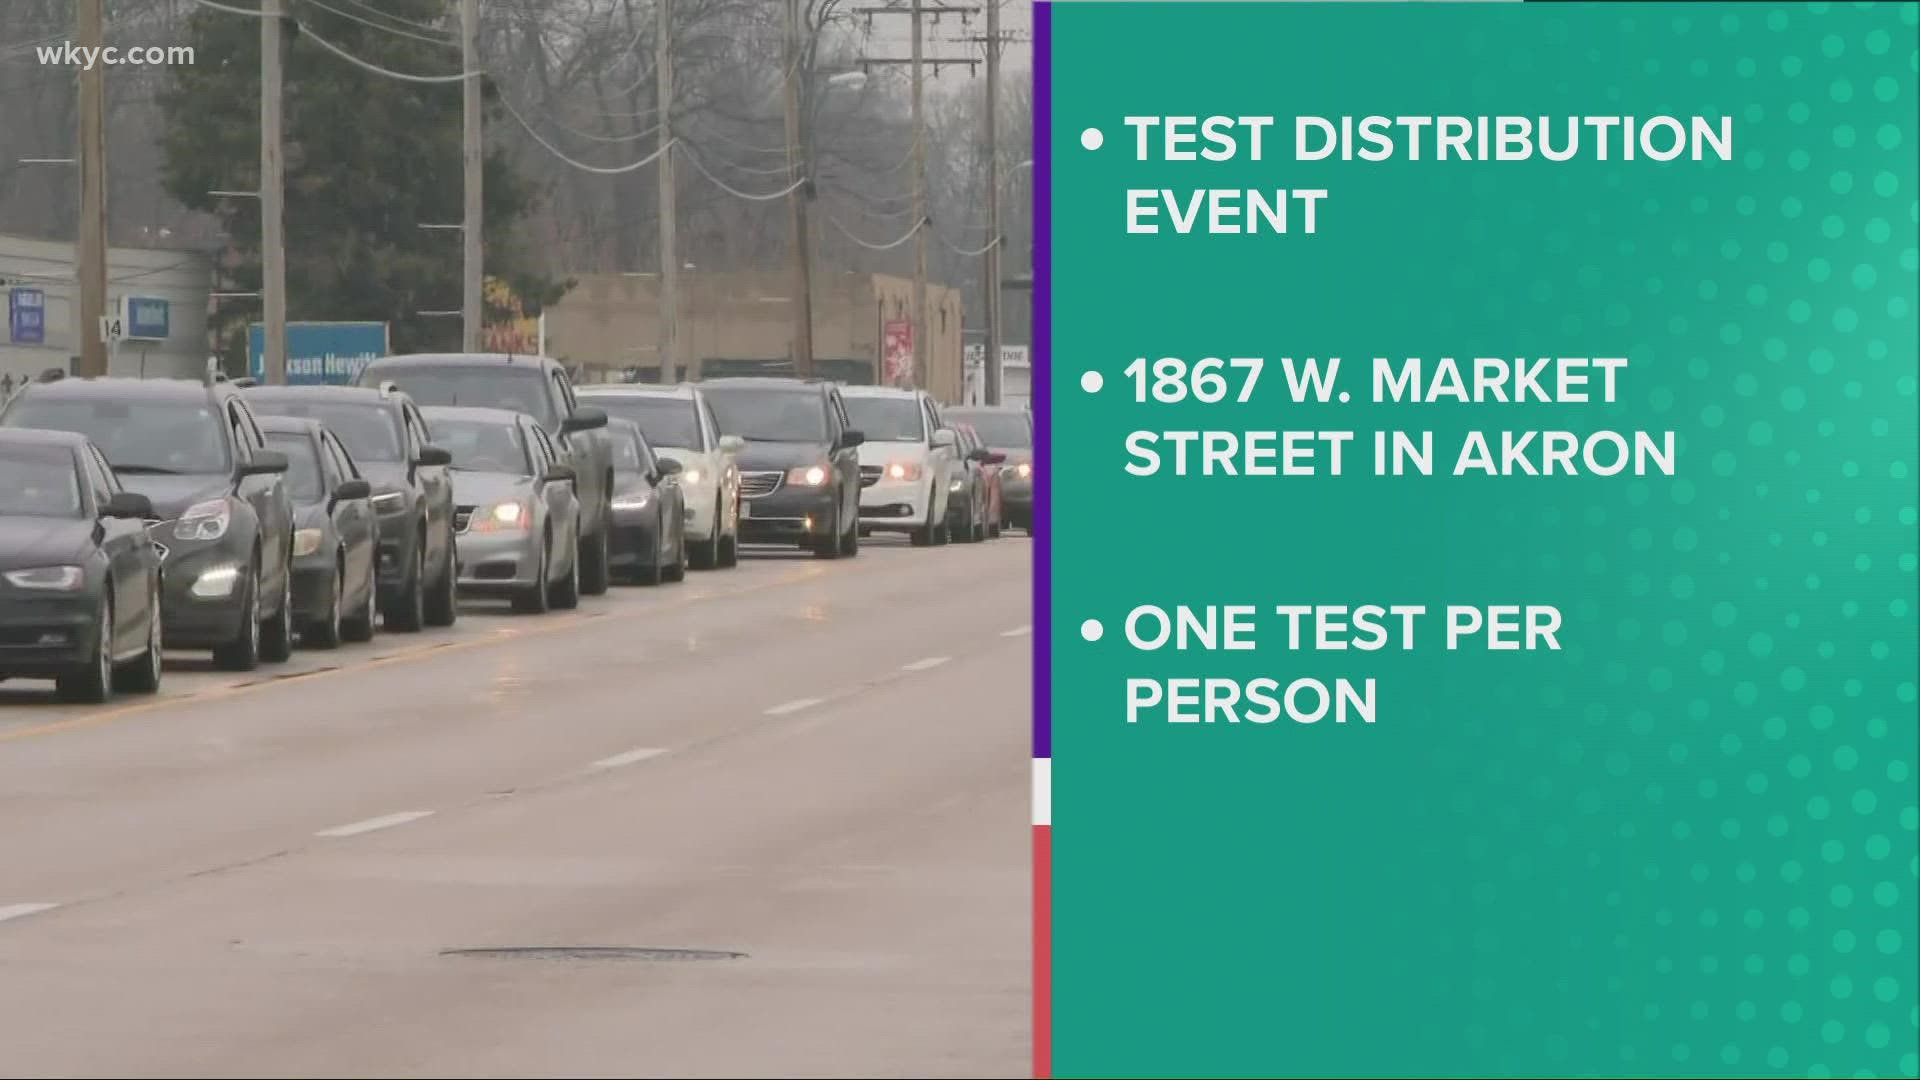 The distribution event will be held from 10 a.m. to 12 p.m. at Summit County Public Health on West Market Street in Akron. You must wear a mask to get a test kit.